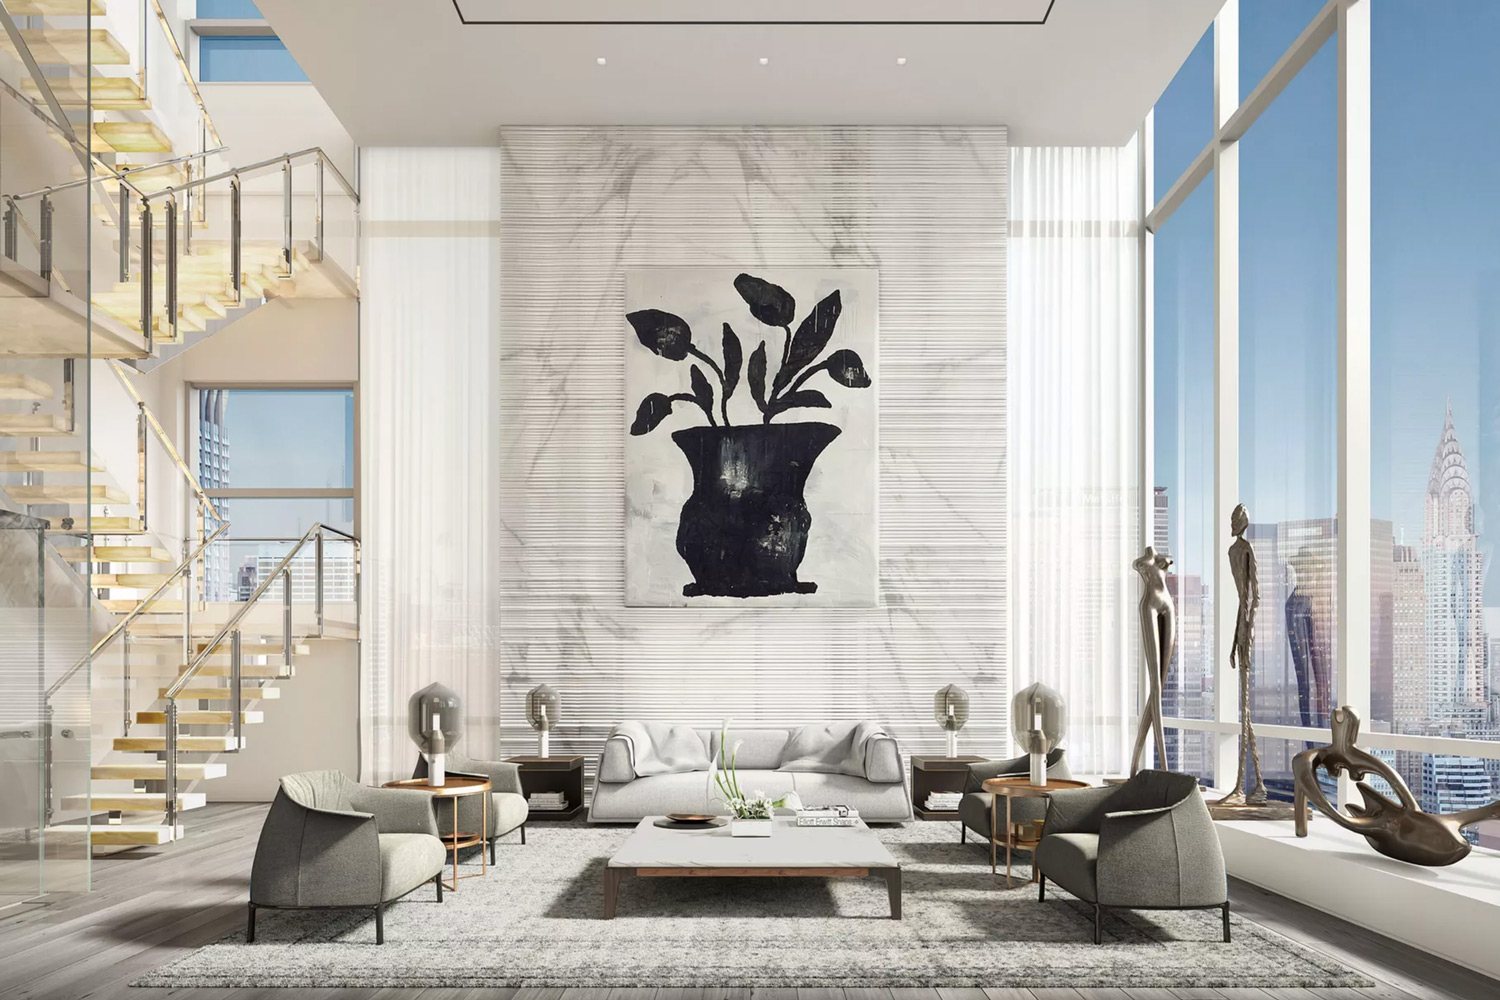 Top NYC Most Expensive Penthouses